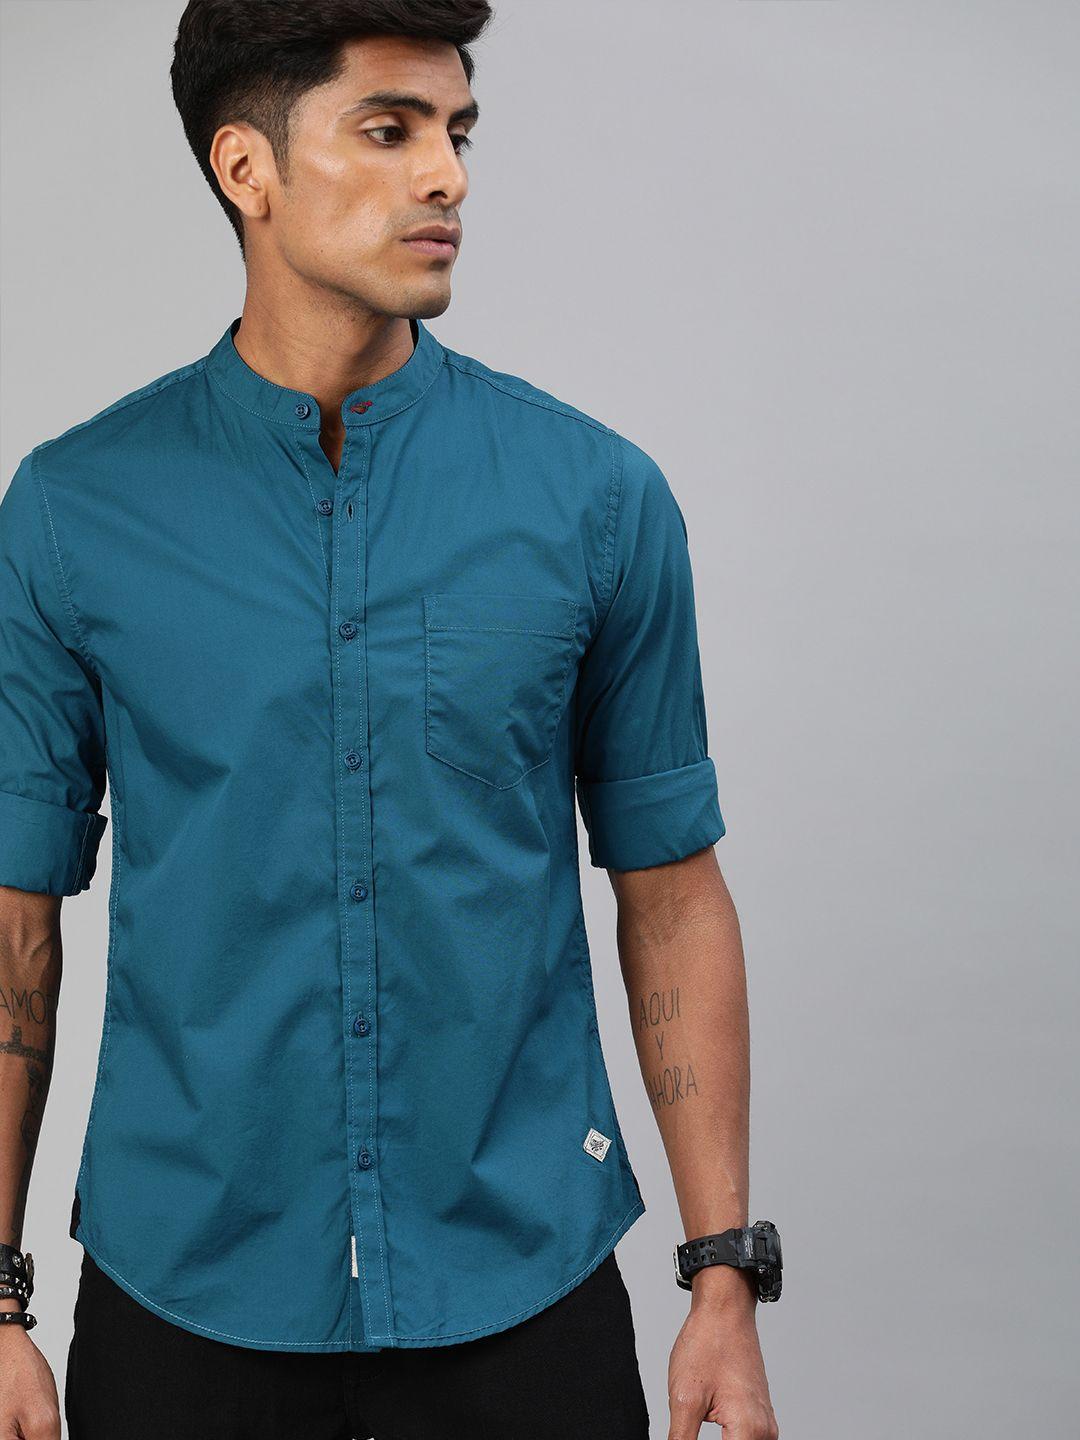 roadster men teal blue regular fit solid sustainable casual shirt